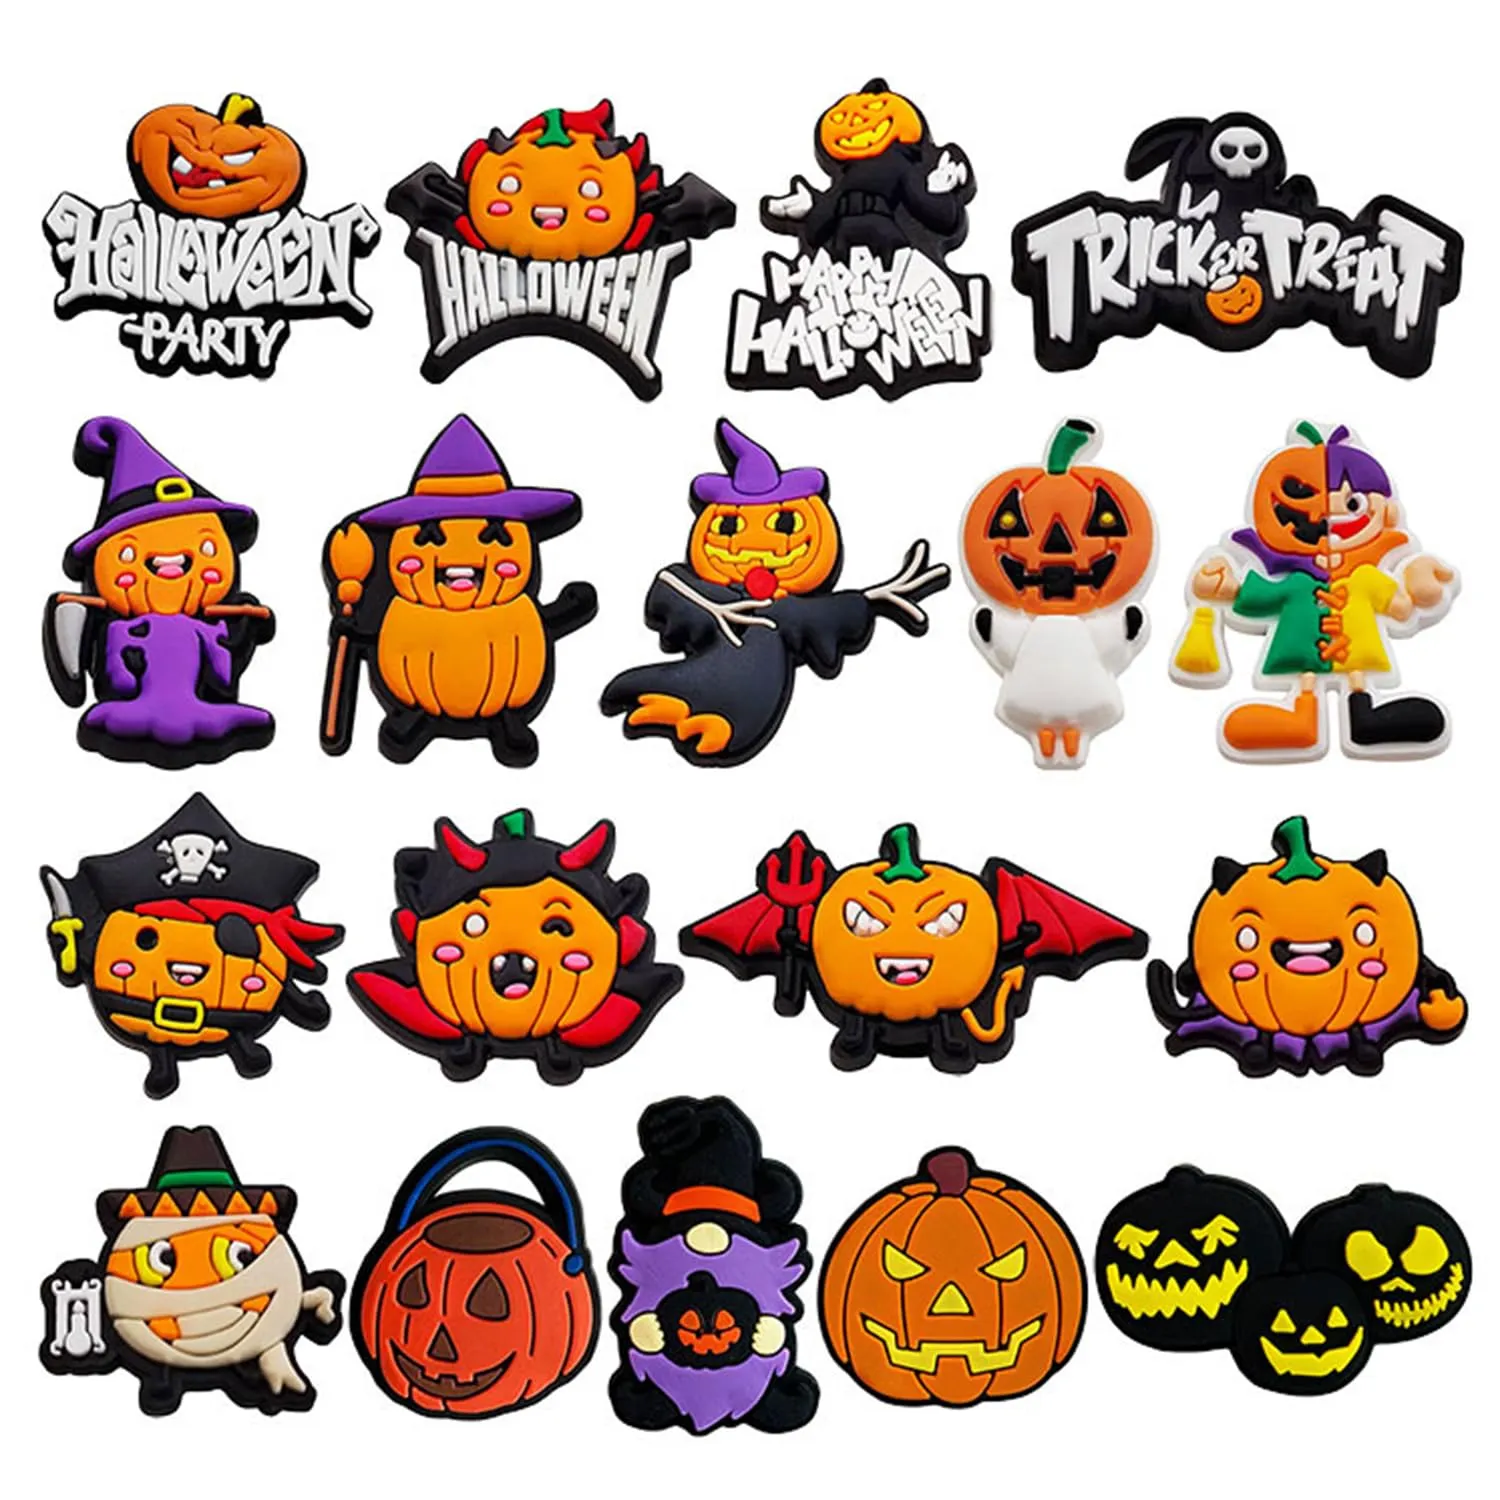 60 halloween charms with horror charms for clog. best nightmare before christmas gift for clog. comes with hocus pocus coraline and goth charms for adults and kids.